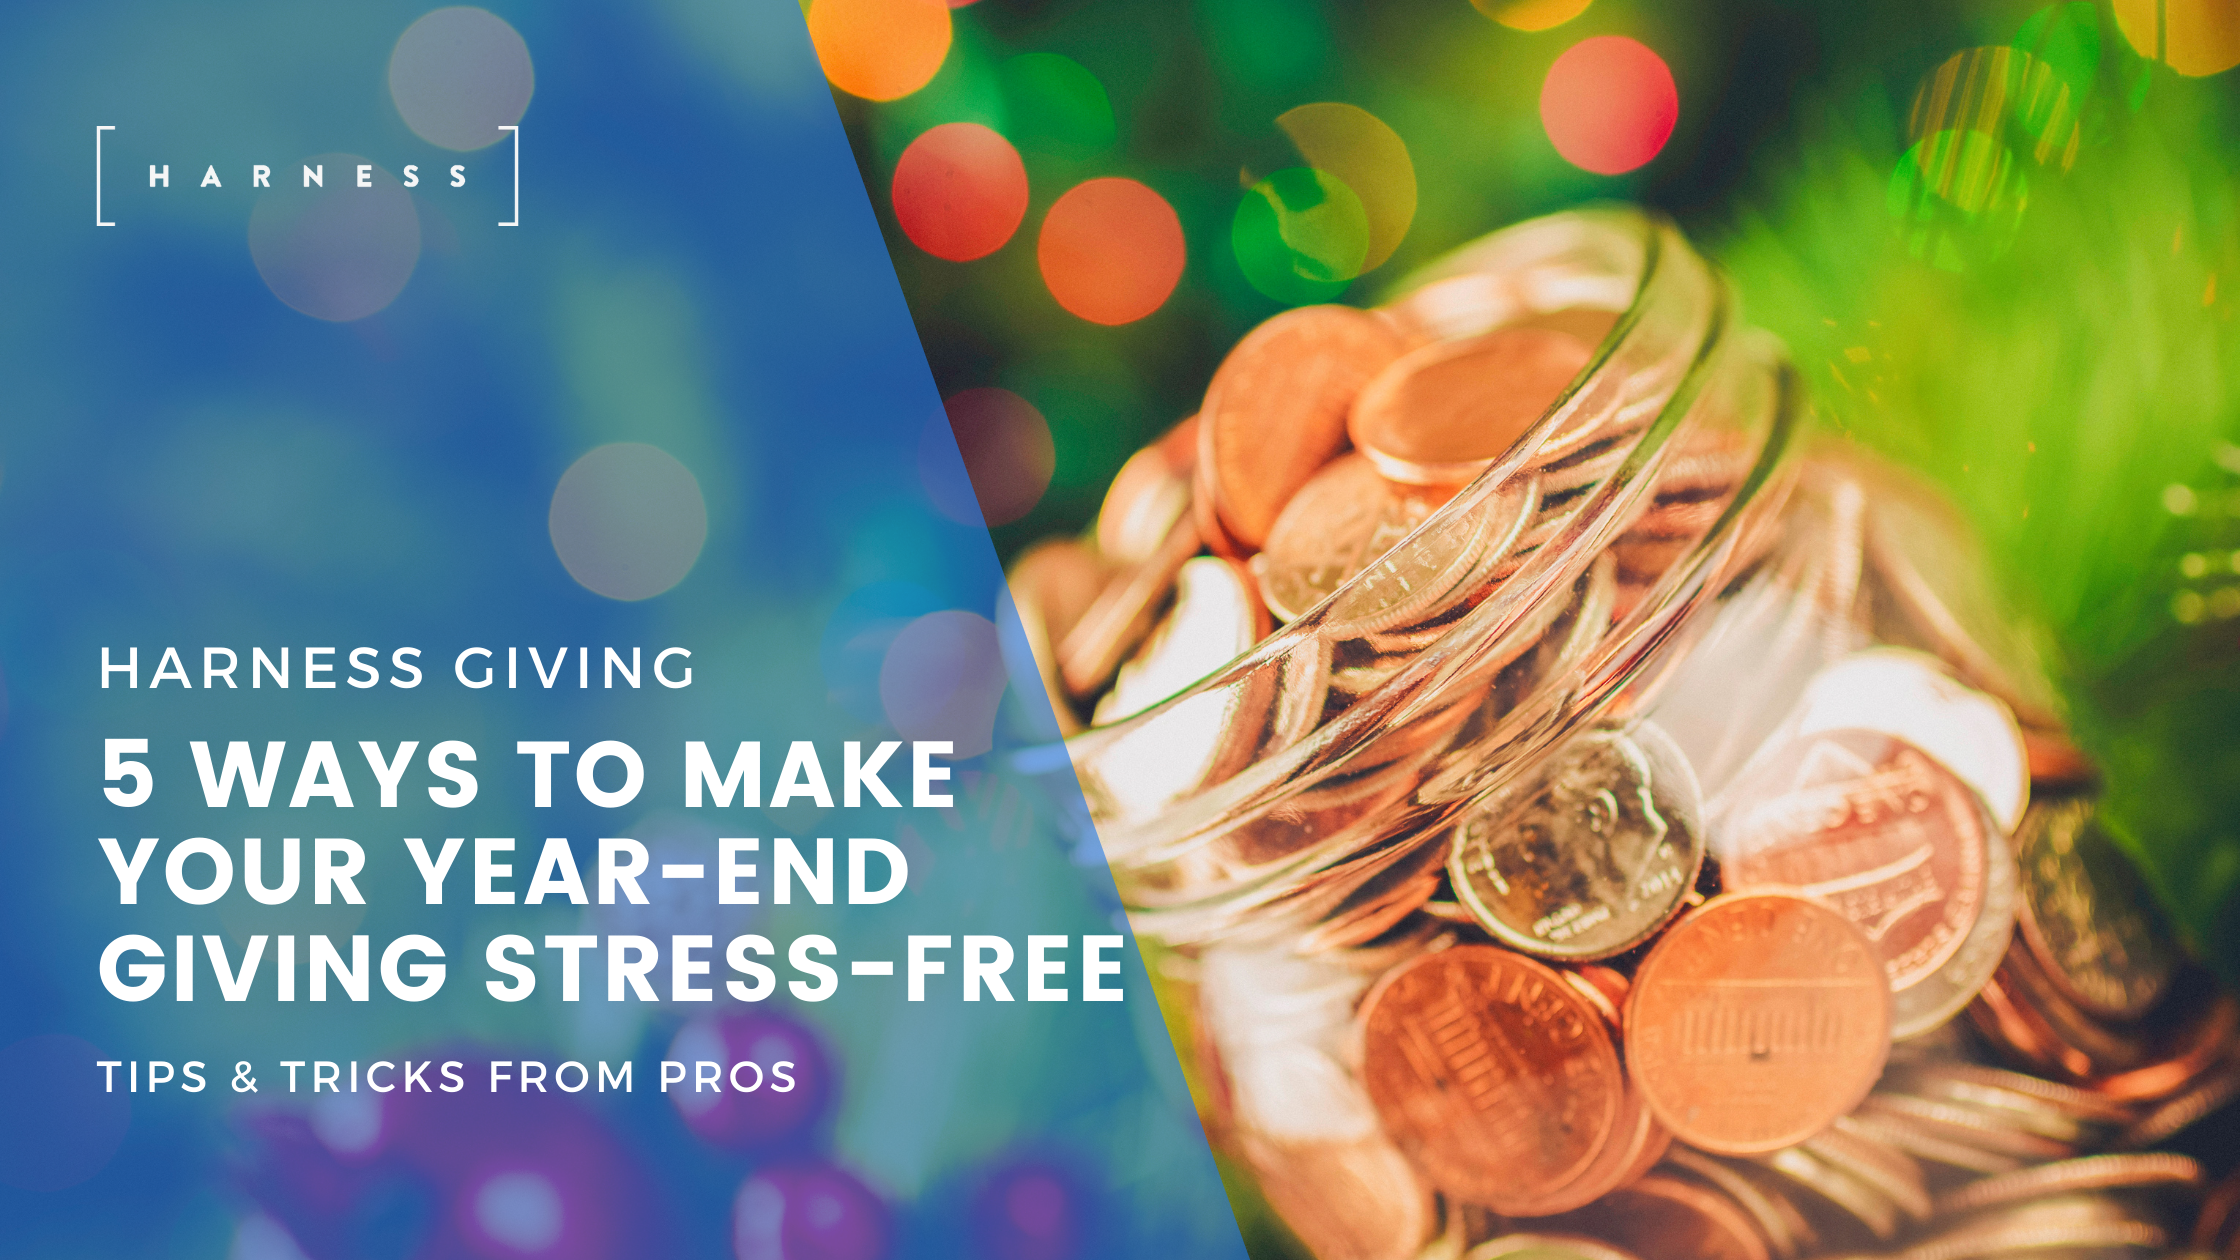 5 Ways To Make Your Year-End Giving Stress-Free